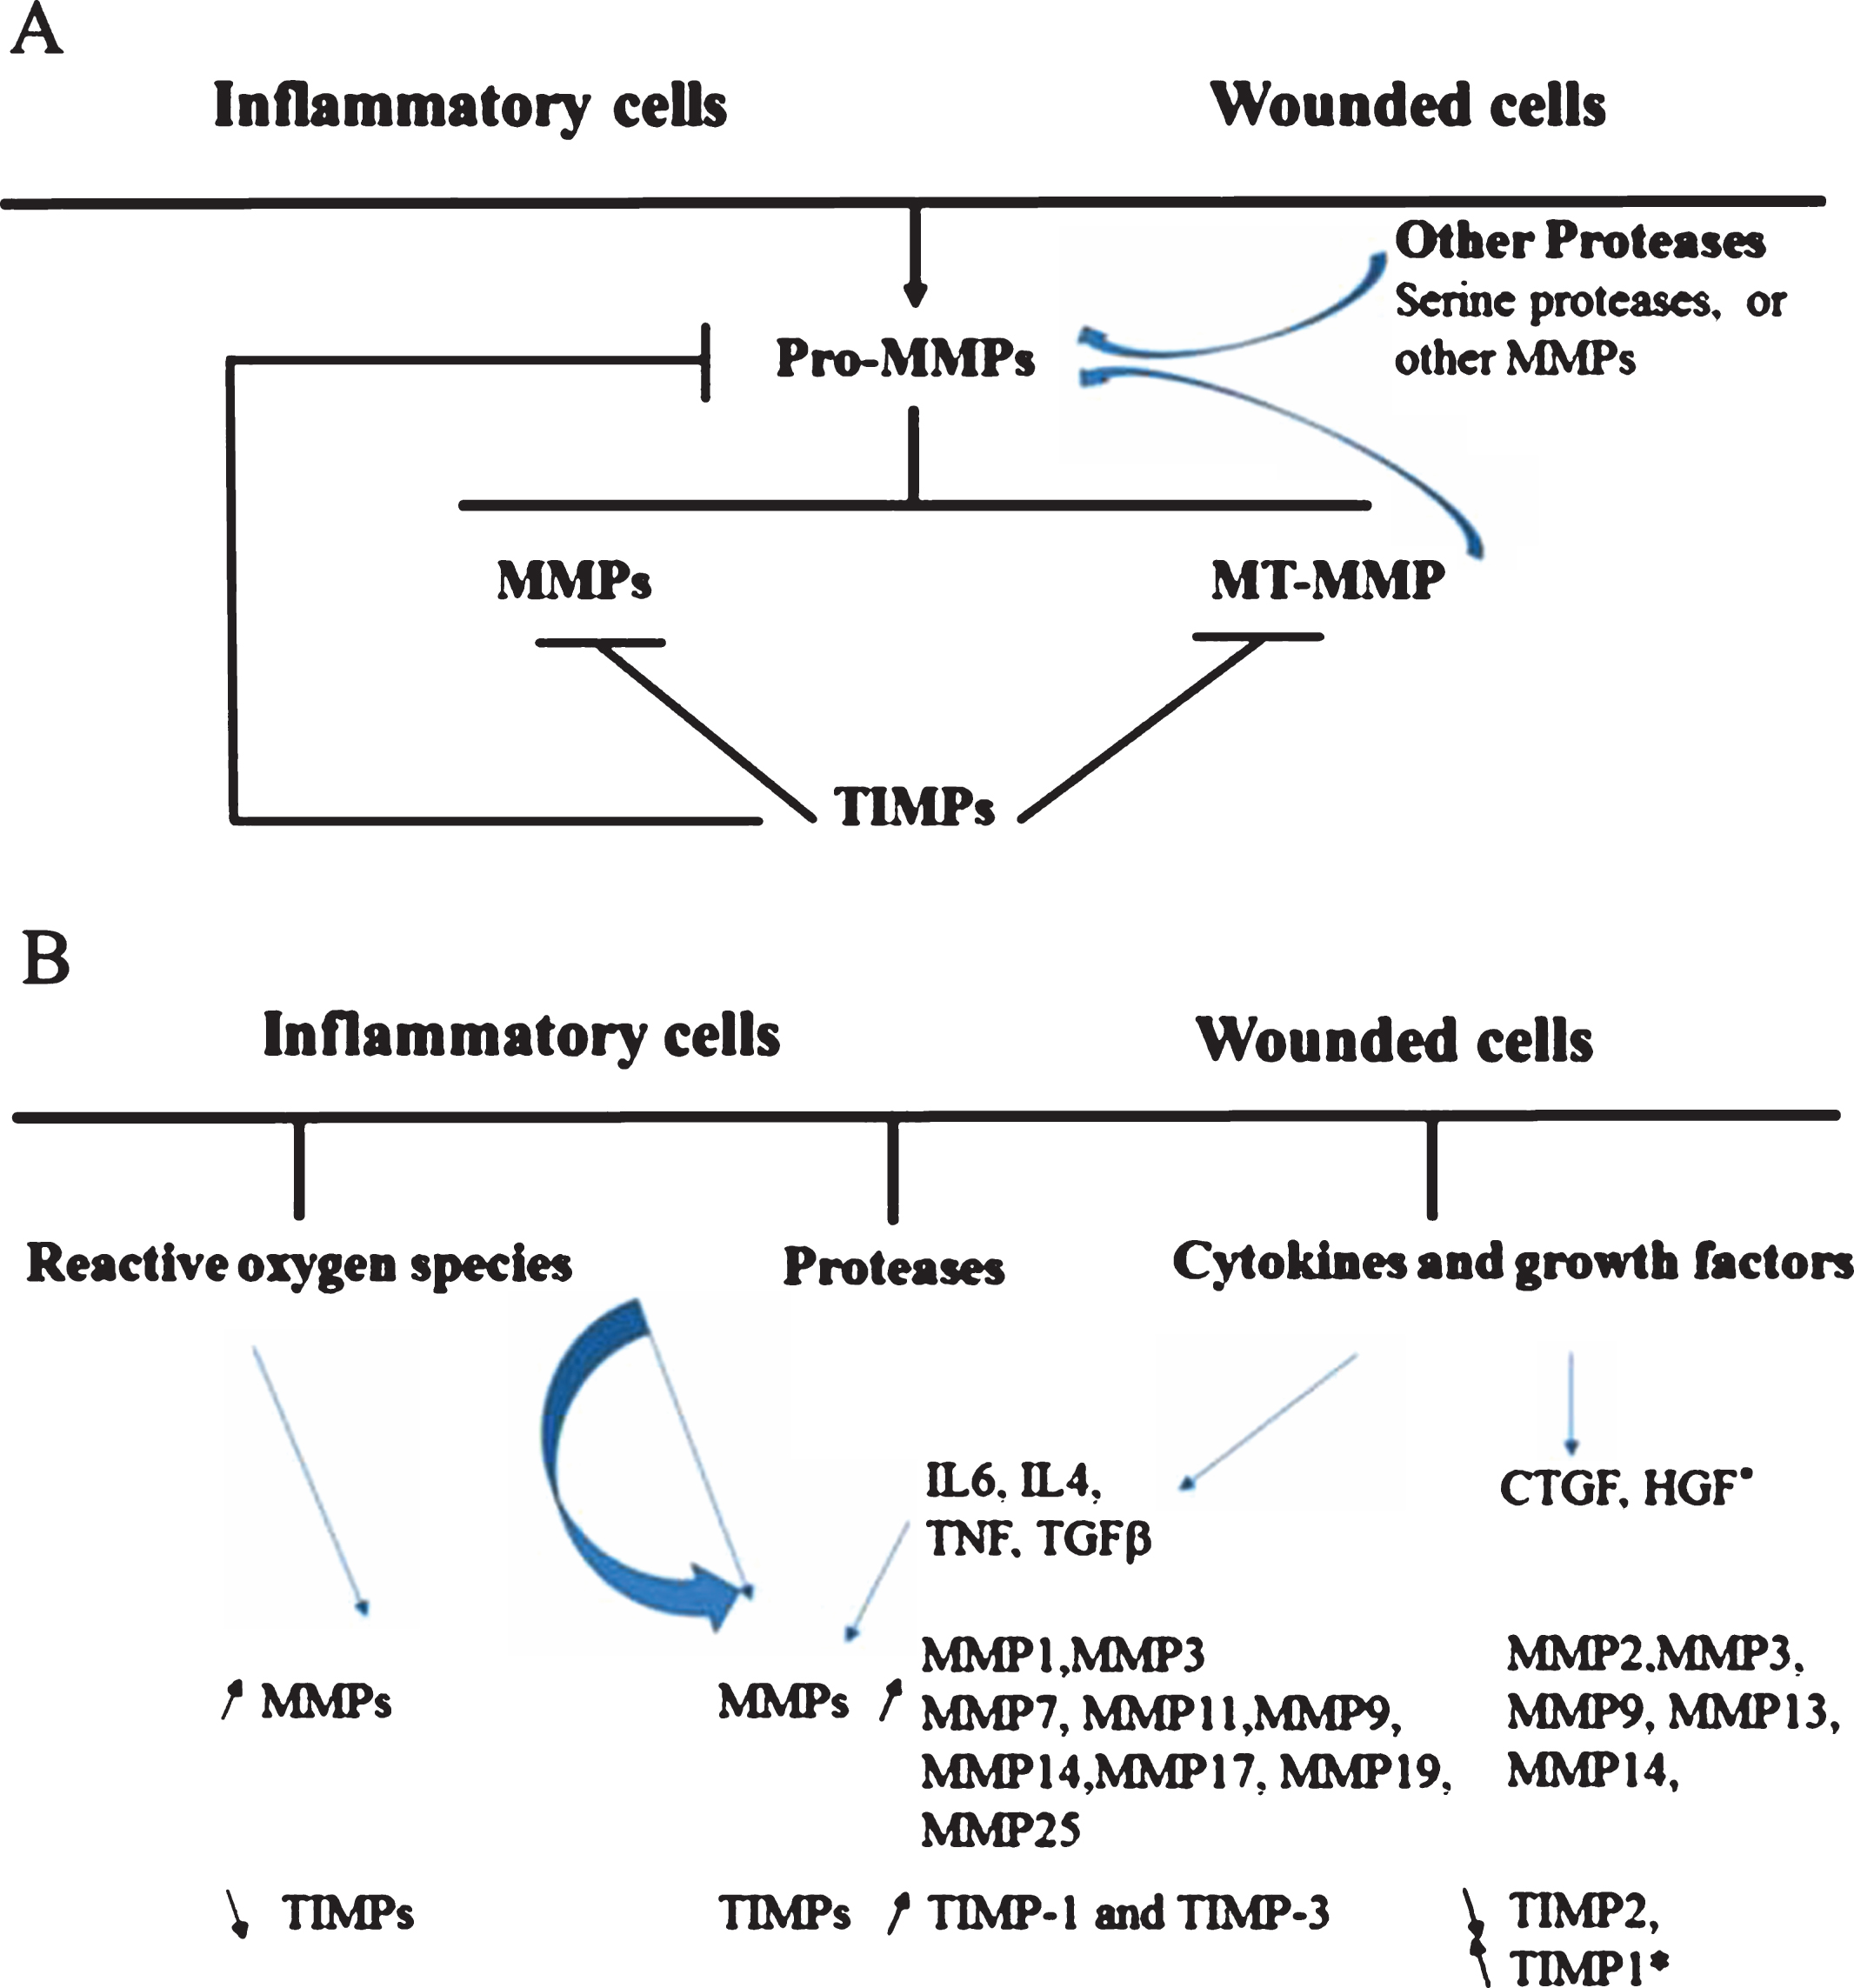 Schematic representation of MMPs activation in inflammatory and wound conditions. Panel A: Overview of MMPs production, activation and their inhibition by TIMPs. Panel B: Modulation of MMPs/TIMPs production by reactive oxygen species, other proteases and by cytokines and growth factors released in inflammatory and wound conditions. These regulations are reported in the literature and may depend on cell types and tissue microenvironment. Pro-MMPs are the inactive MMPs forms; MT-MMPs membrane-type MMP; TIMPs, Tissue Inhibitor of Metalloproteinases. Thin curved arrow indicates MMP activation and ⊣ MMPs inhibition.